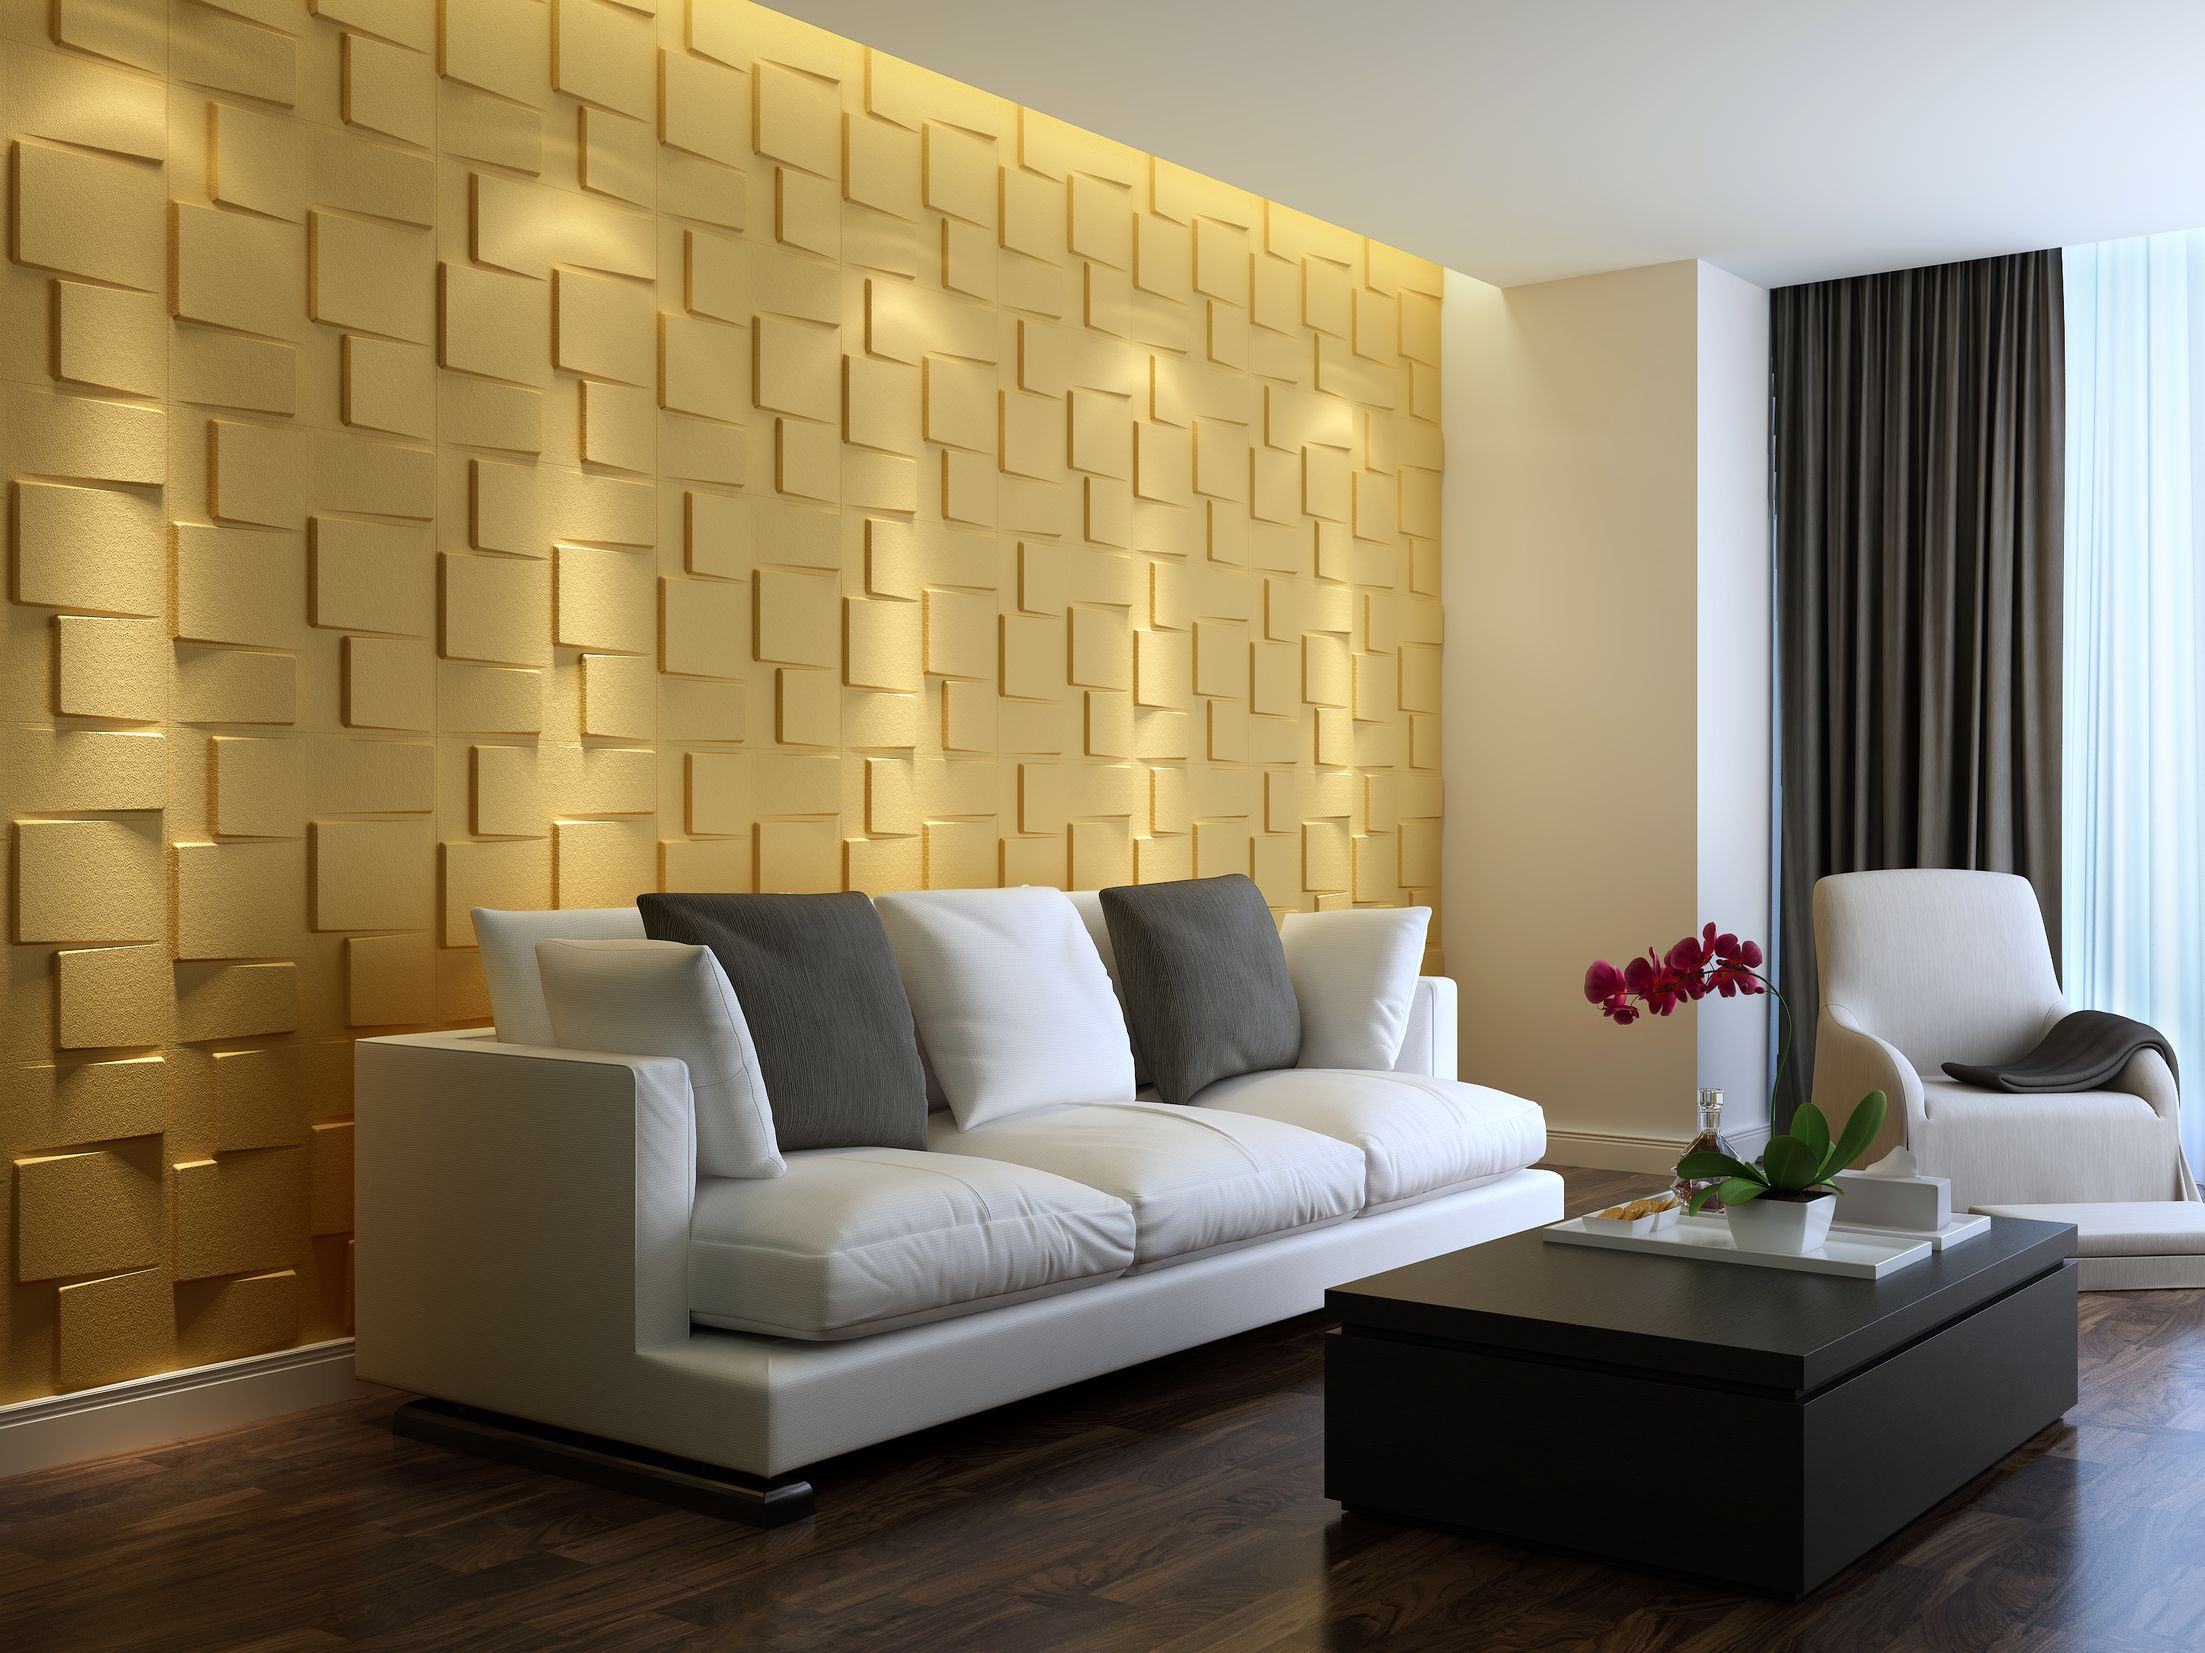 DIY Wall Panel Installation: Step-by-Step Tips and Tricks